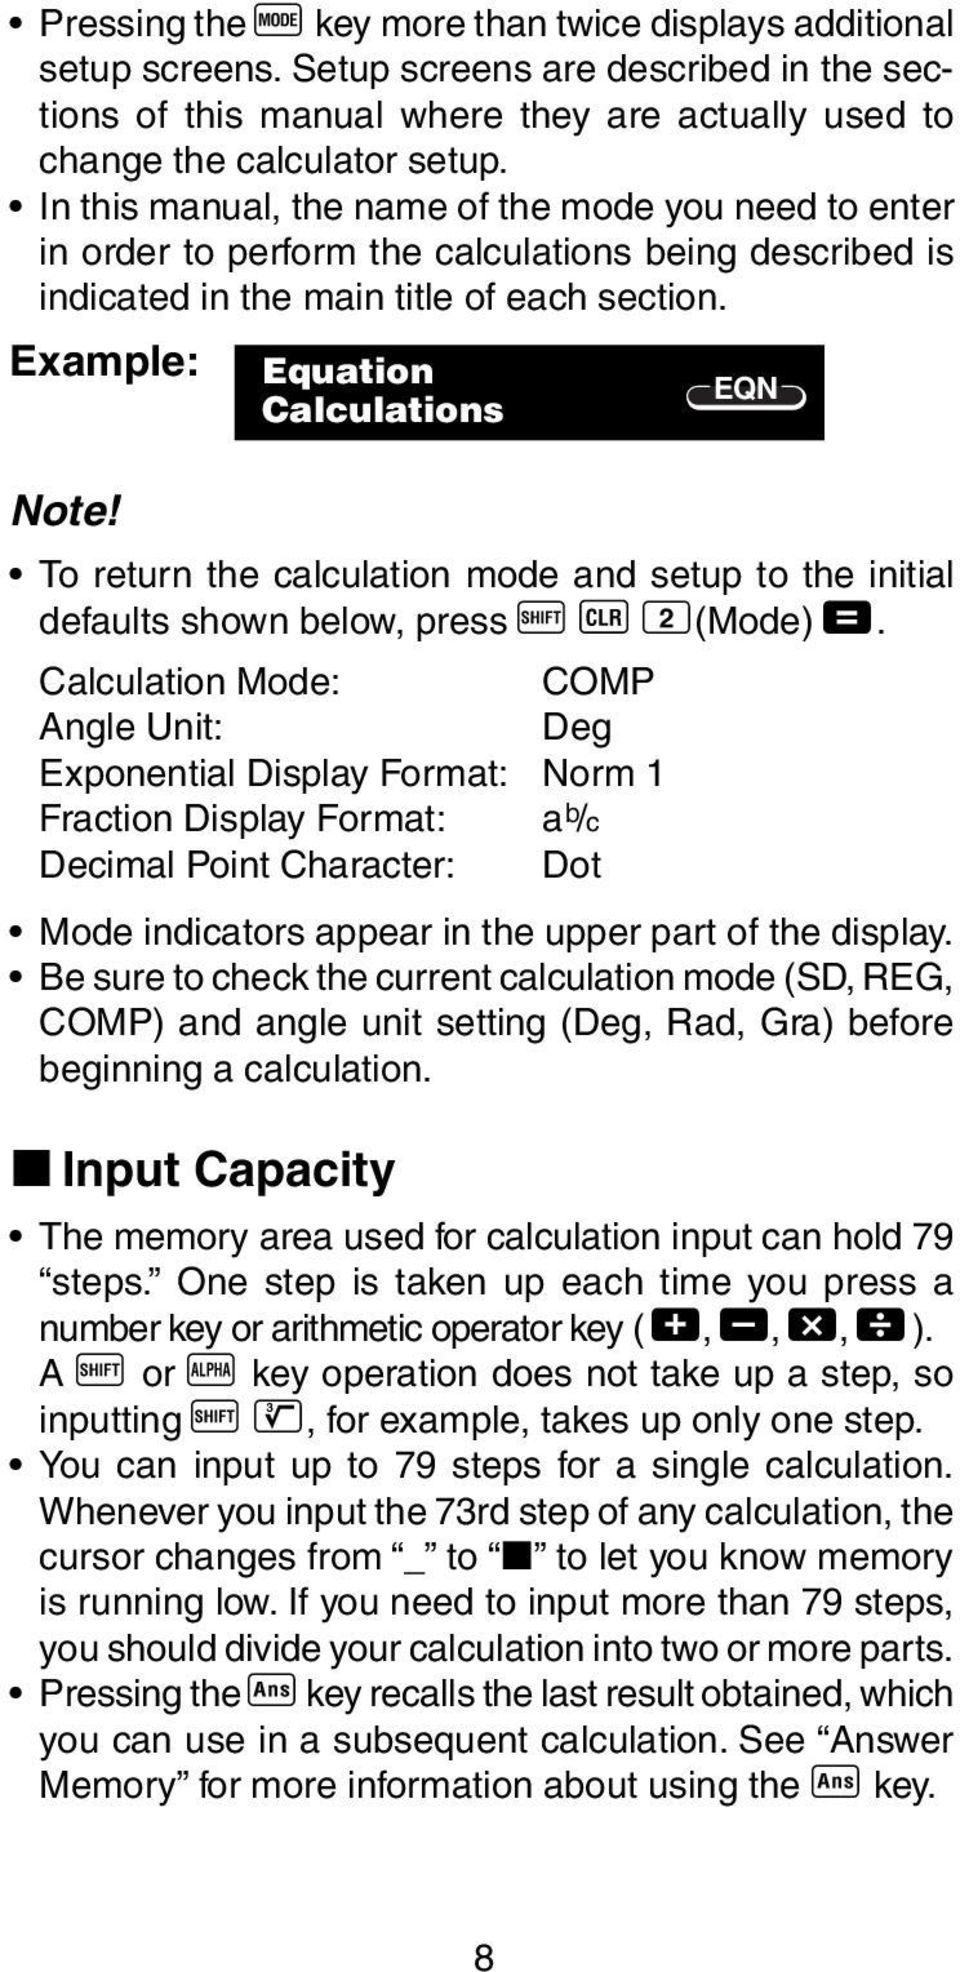 To return the calculation mode and setup to the initial defaults shown below, press A B 2(Mode) =.